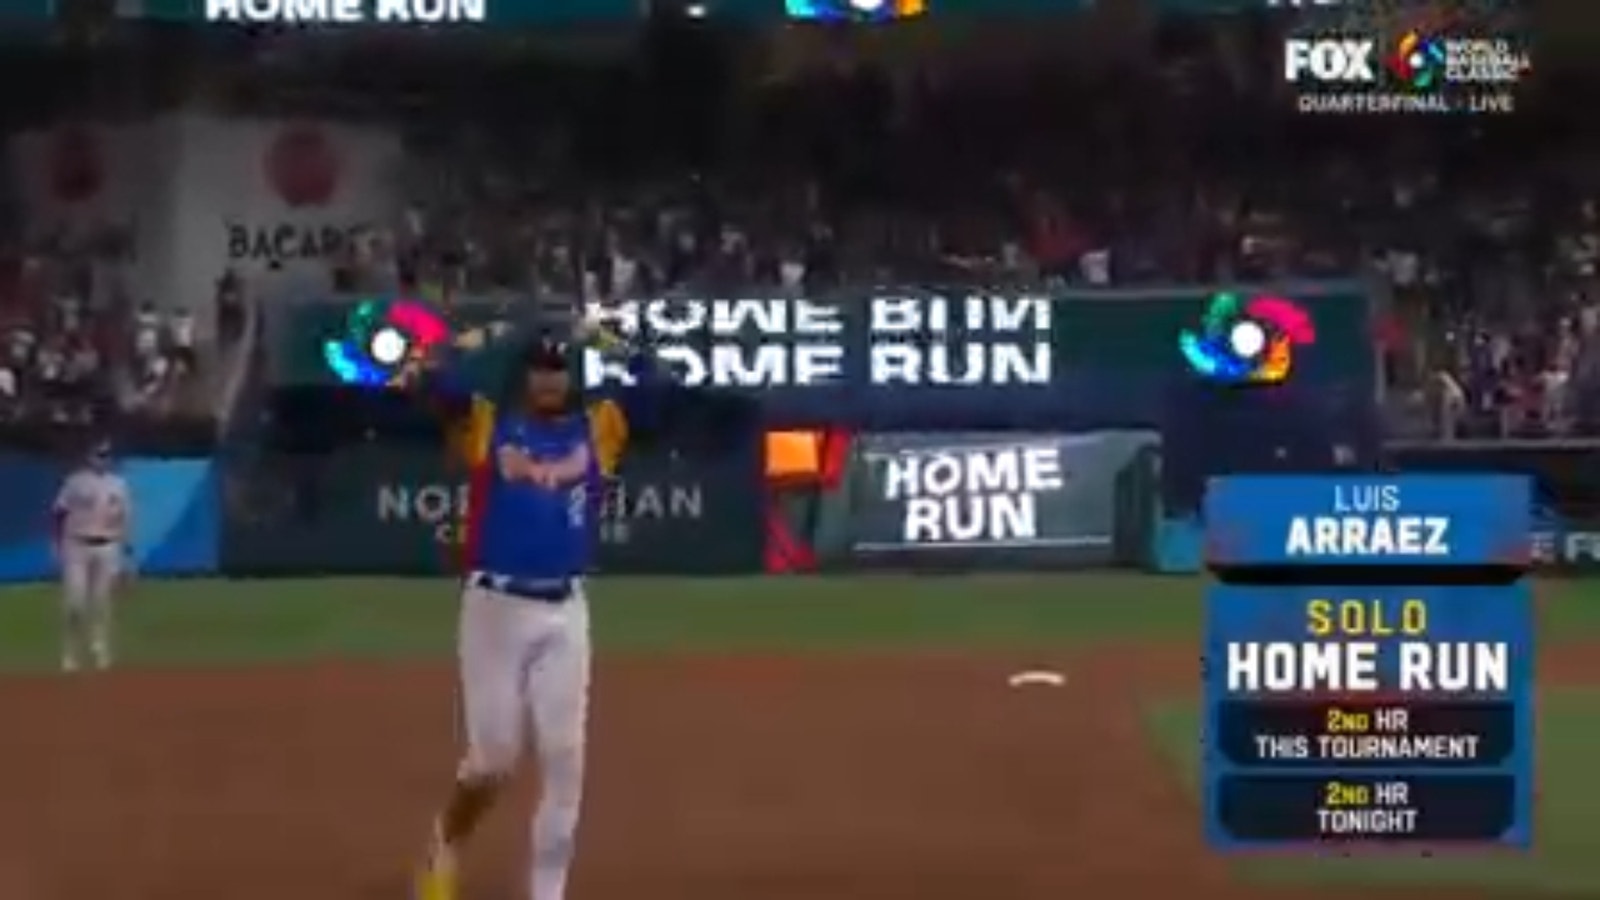 Luis Arráez hits his second home run of the game to give Venezuela a 7-5 lead over the USA